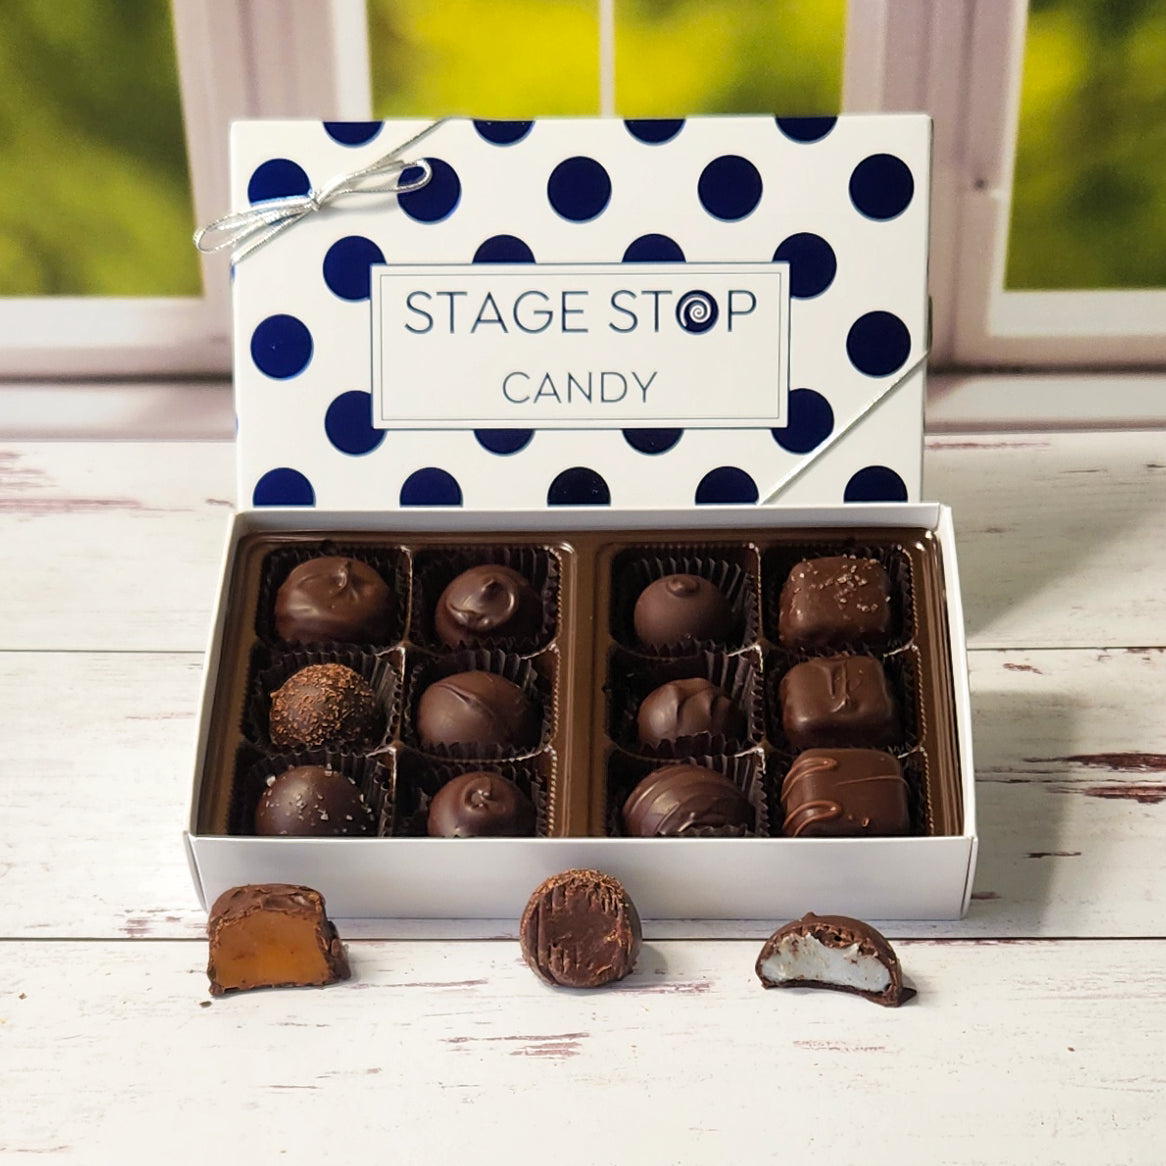 12 of our most popular chocolate pieces. Included in this small candy assortment you will find creams, caramels and truffles.